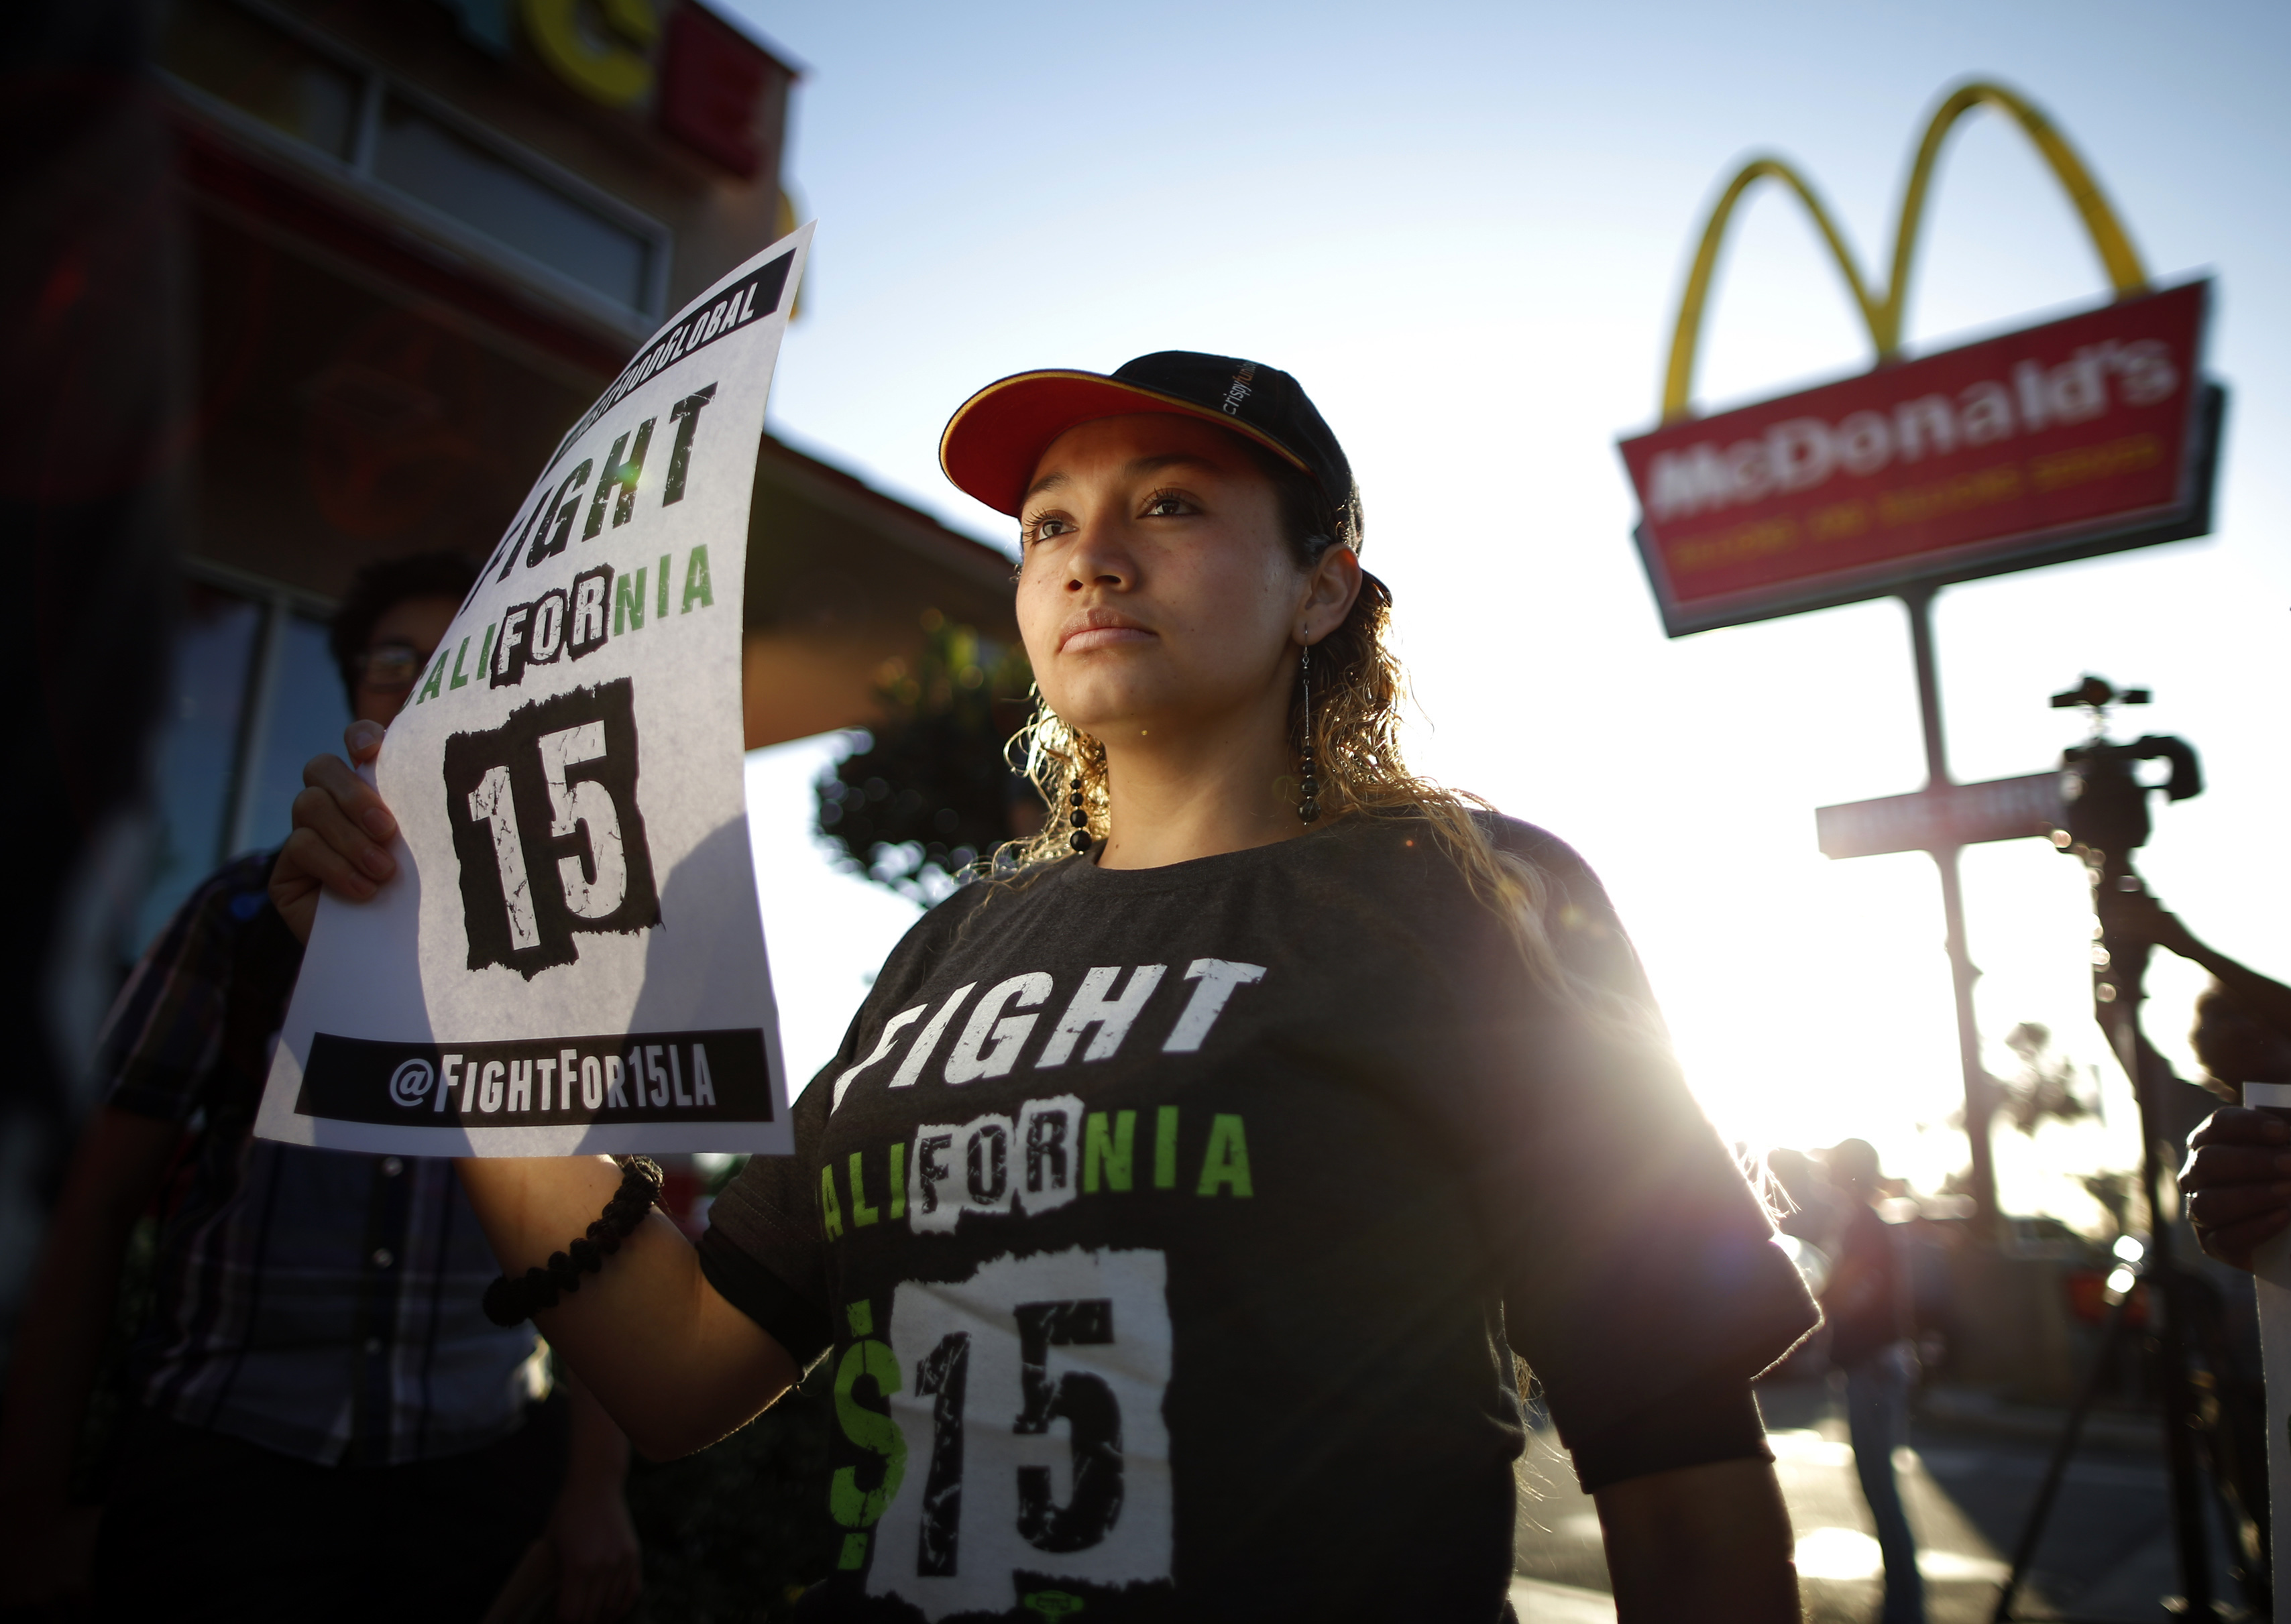 Demonstrators take part in a protest to demand higher wages for fast-food workers outside McDonald's in Los Angeles on May 15, 2014. 